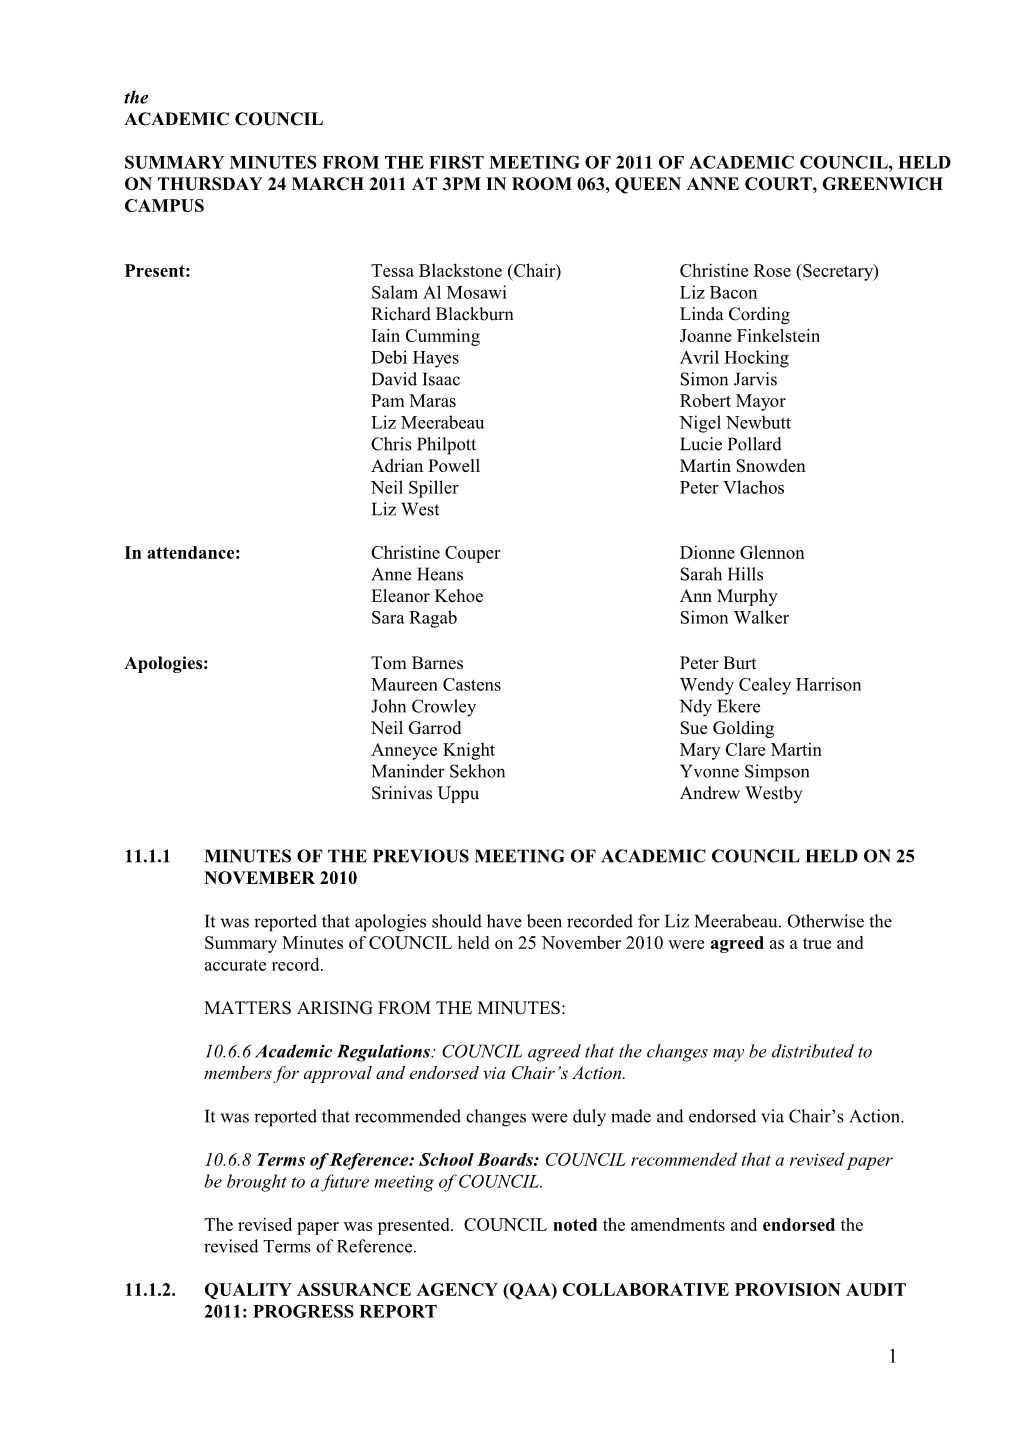 AGENDA for the 1St Meeting of ACADEMIC COUNCIL in 2011 to Be Held on THURSDAY 24 MARCH 2011 at 3